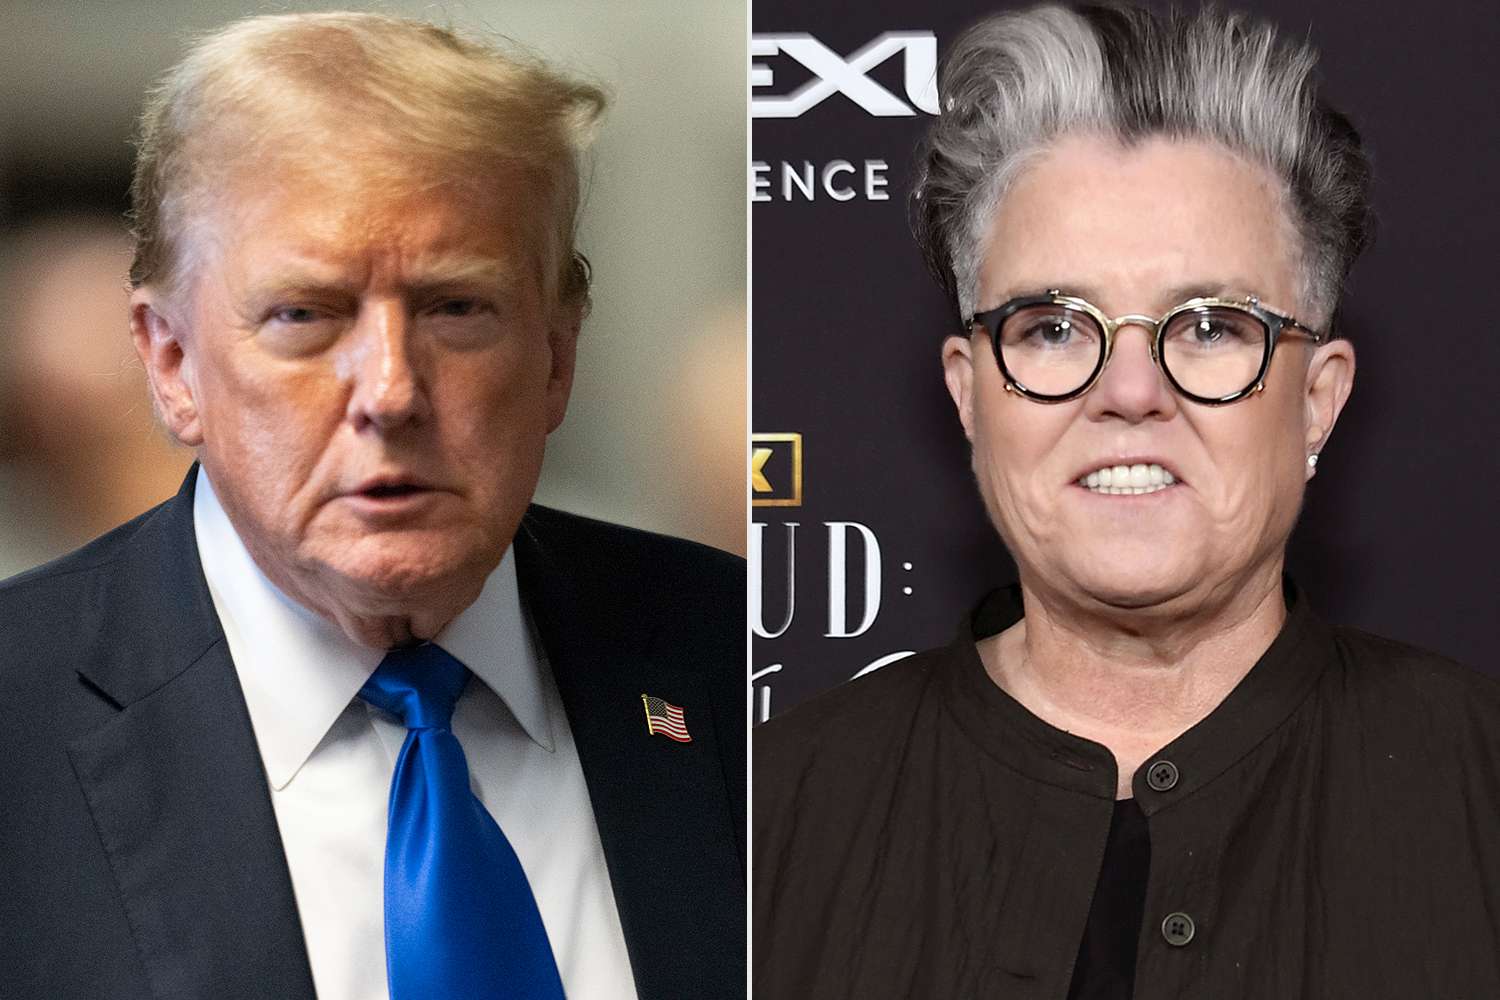 Rosie O'Donnell celebrates Donald Trump conviction after longtime feud: 'Criminal cult'